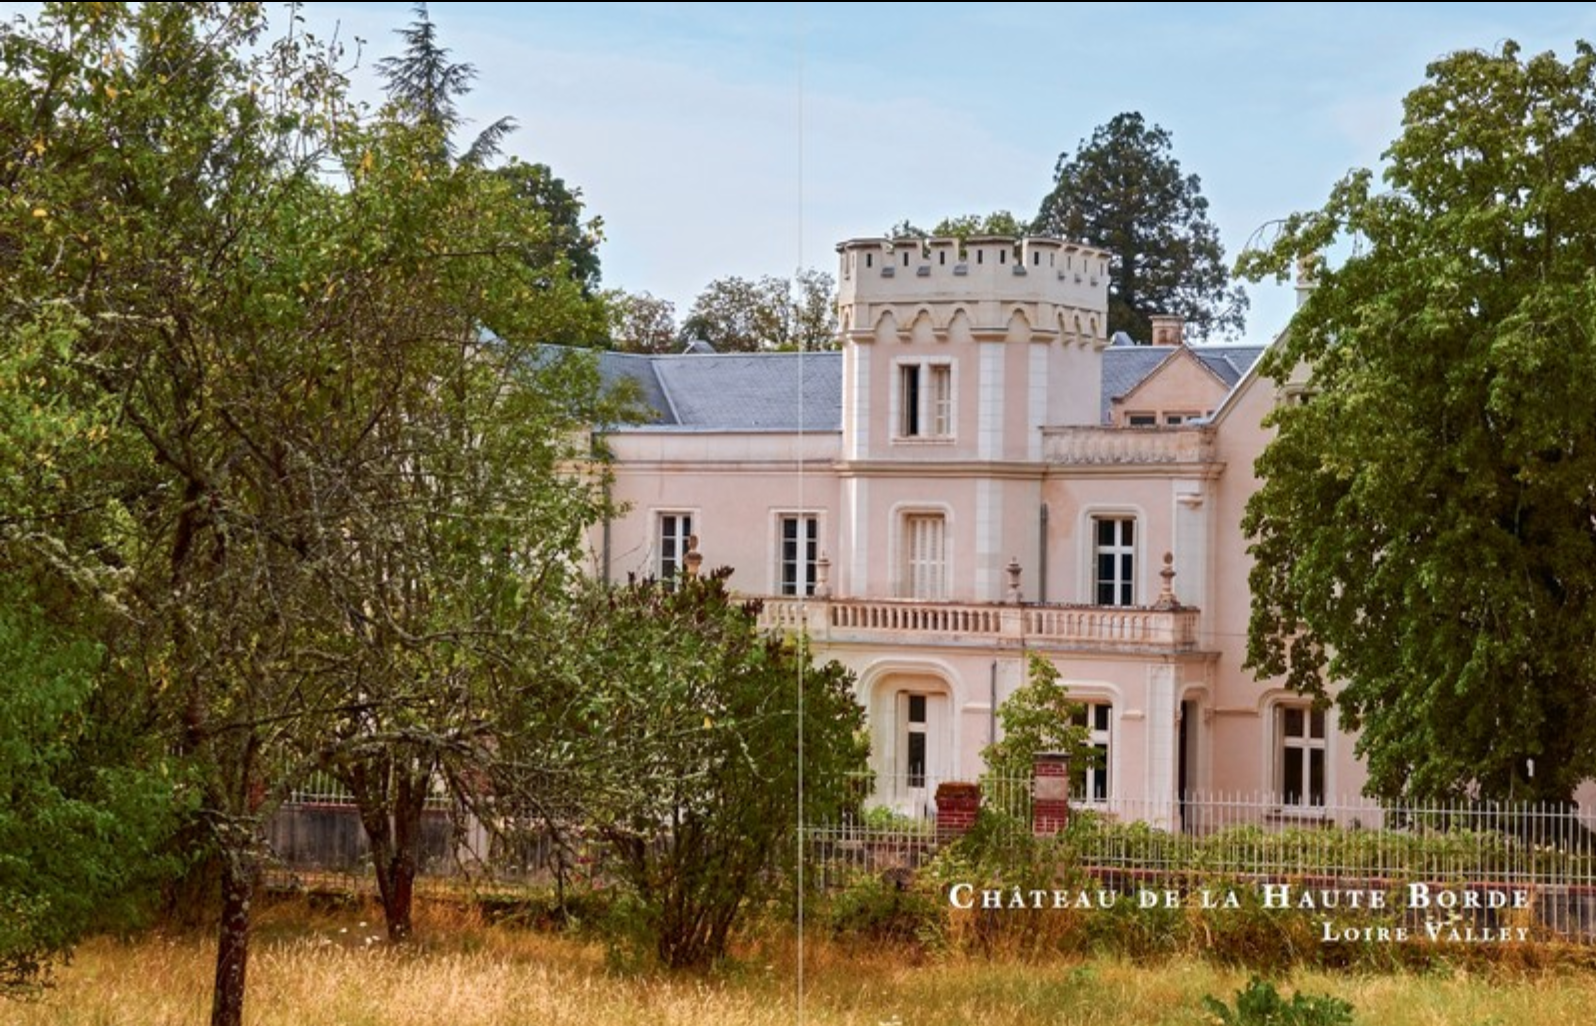 French Chateau Style: Inside France's most exquisite private homes